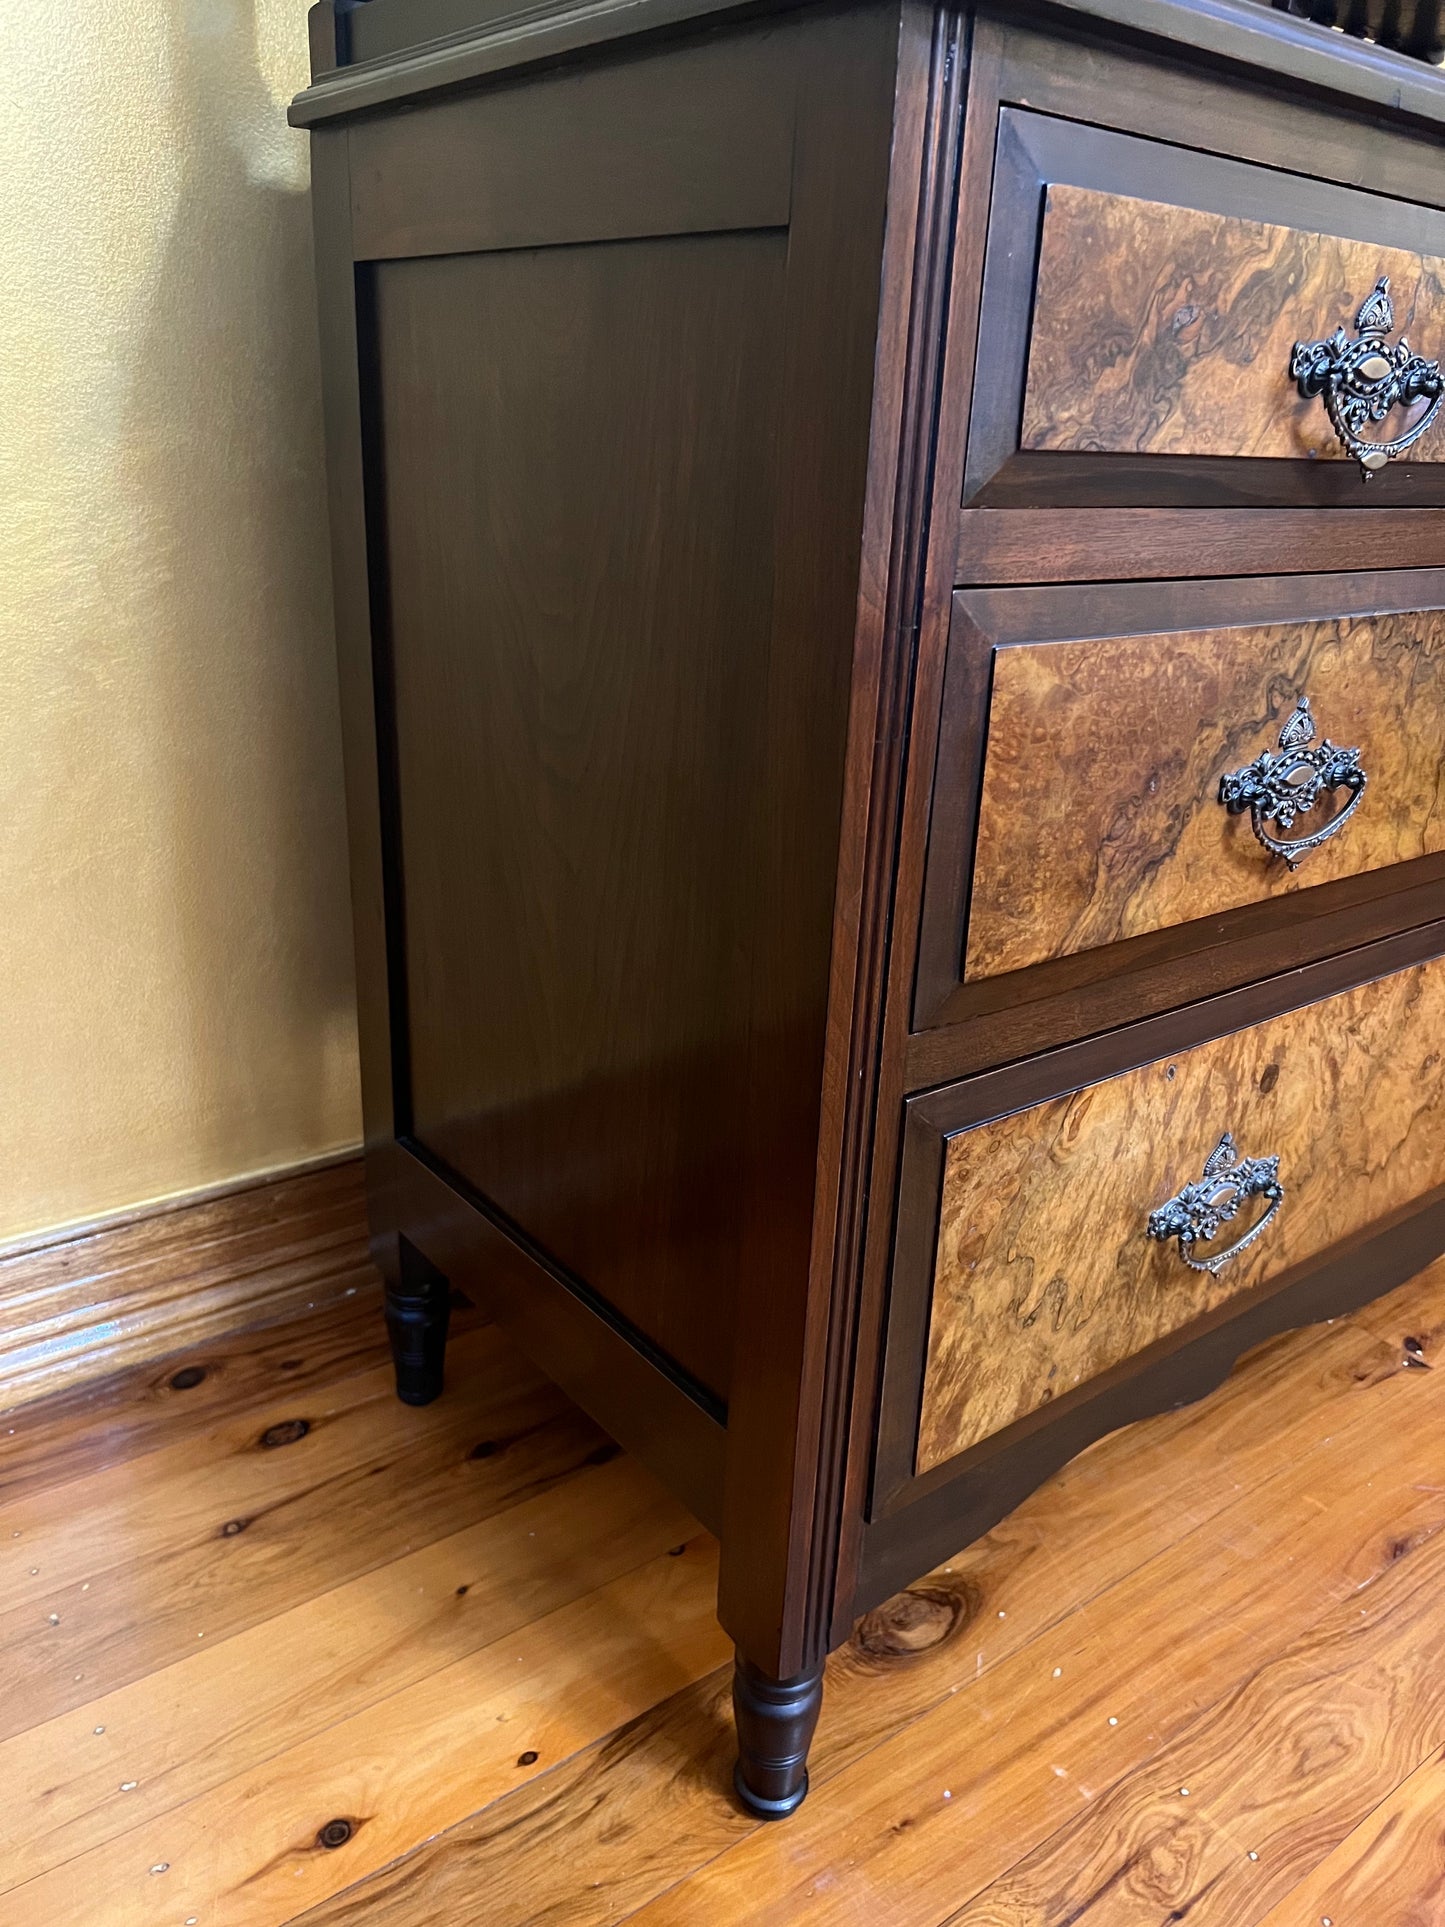 Antique Walnut Dressing Table Four Drawers with Mirror